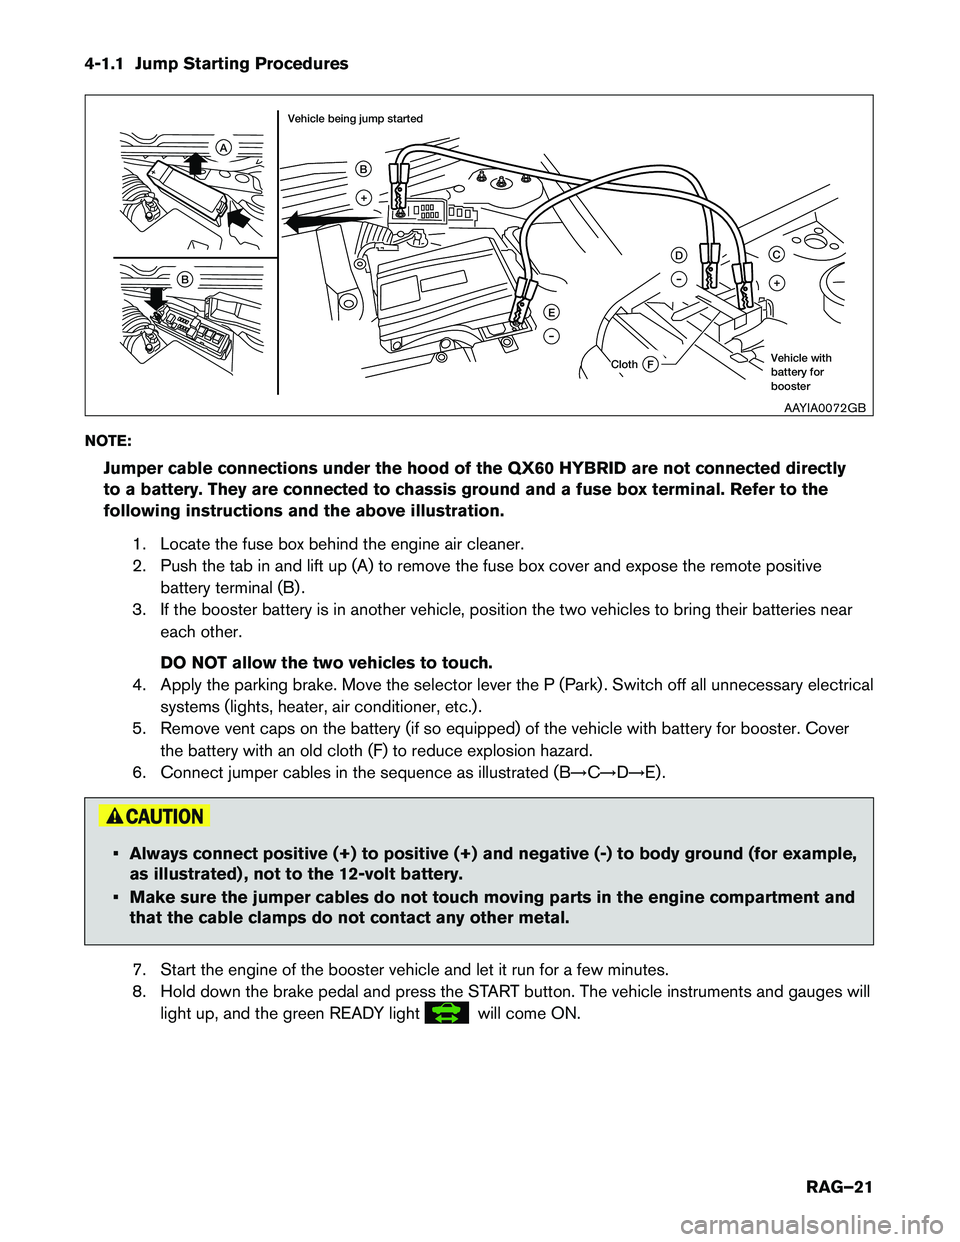 INFINITI QX60 HYBRID 2015  Roadside Assistance Guide 4-1.1 Jump Starting Procedures 
NOTE:Jumper cable connections under the hood of the QX60 HYBRID are not connected directly 
to a battery. They are connected to chassis ground and a fuse box terminal. 